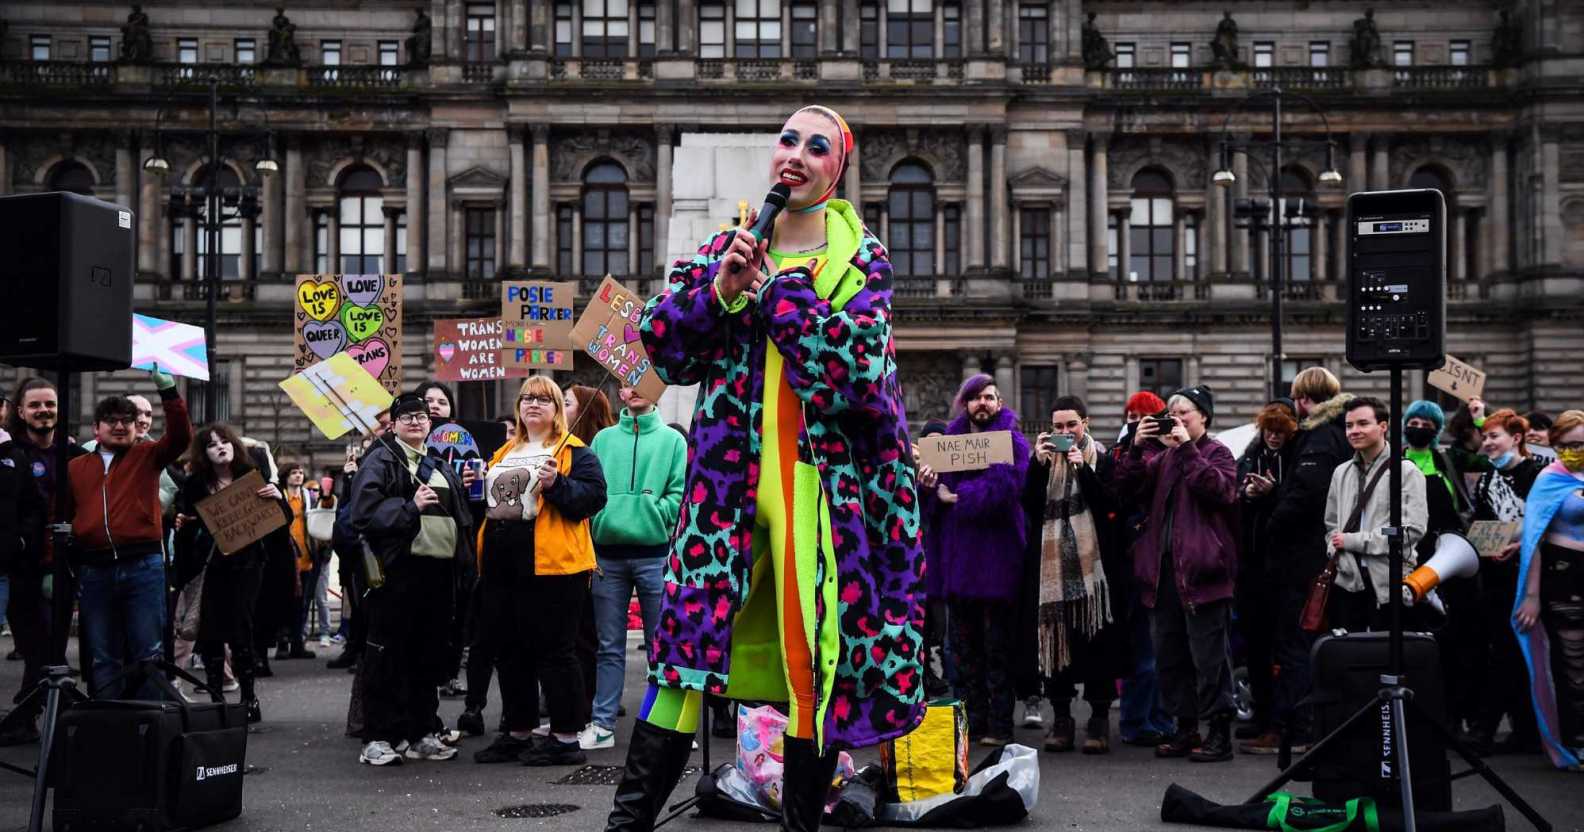 A photo from Glasgow's anti-trans rally shows someone from Cabaret Against The Hate Speech dressed in a brightly coloured clothes holding a microphone as they sing to the crowd